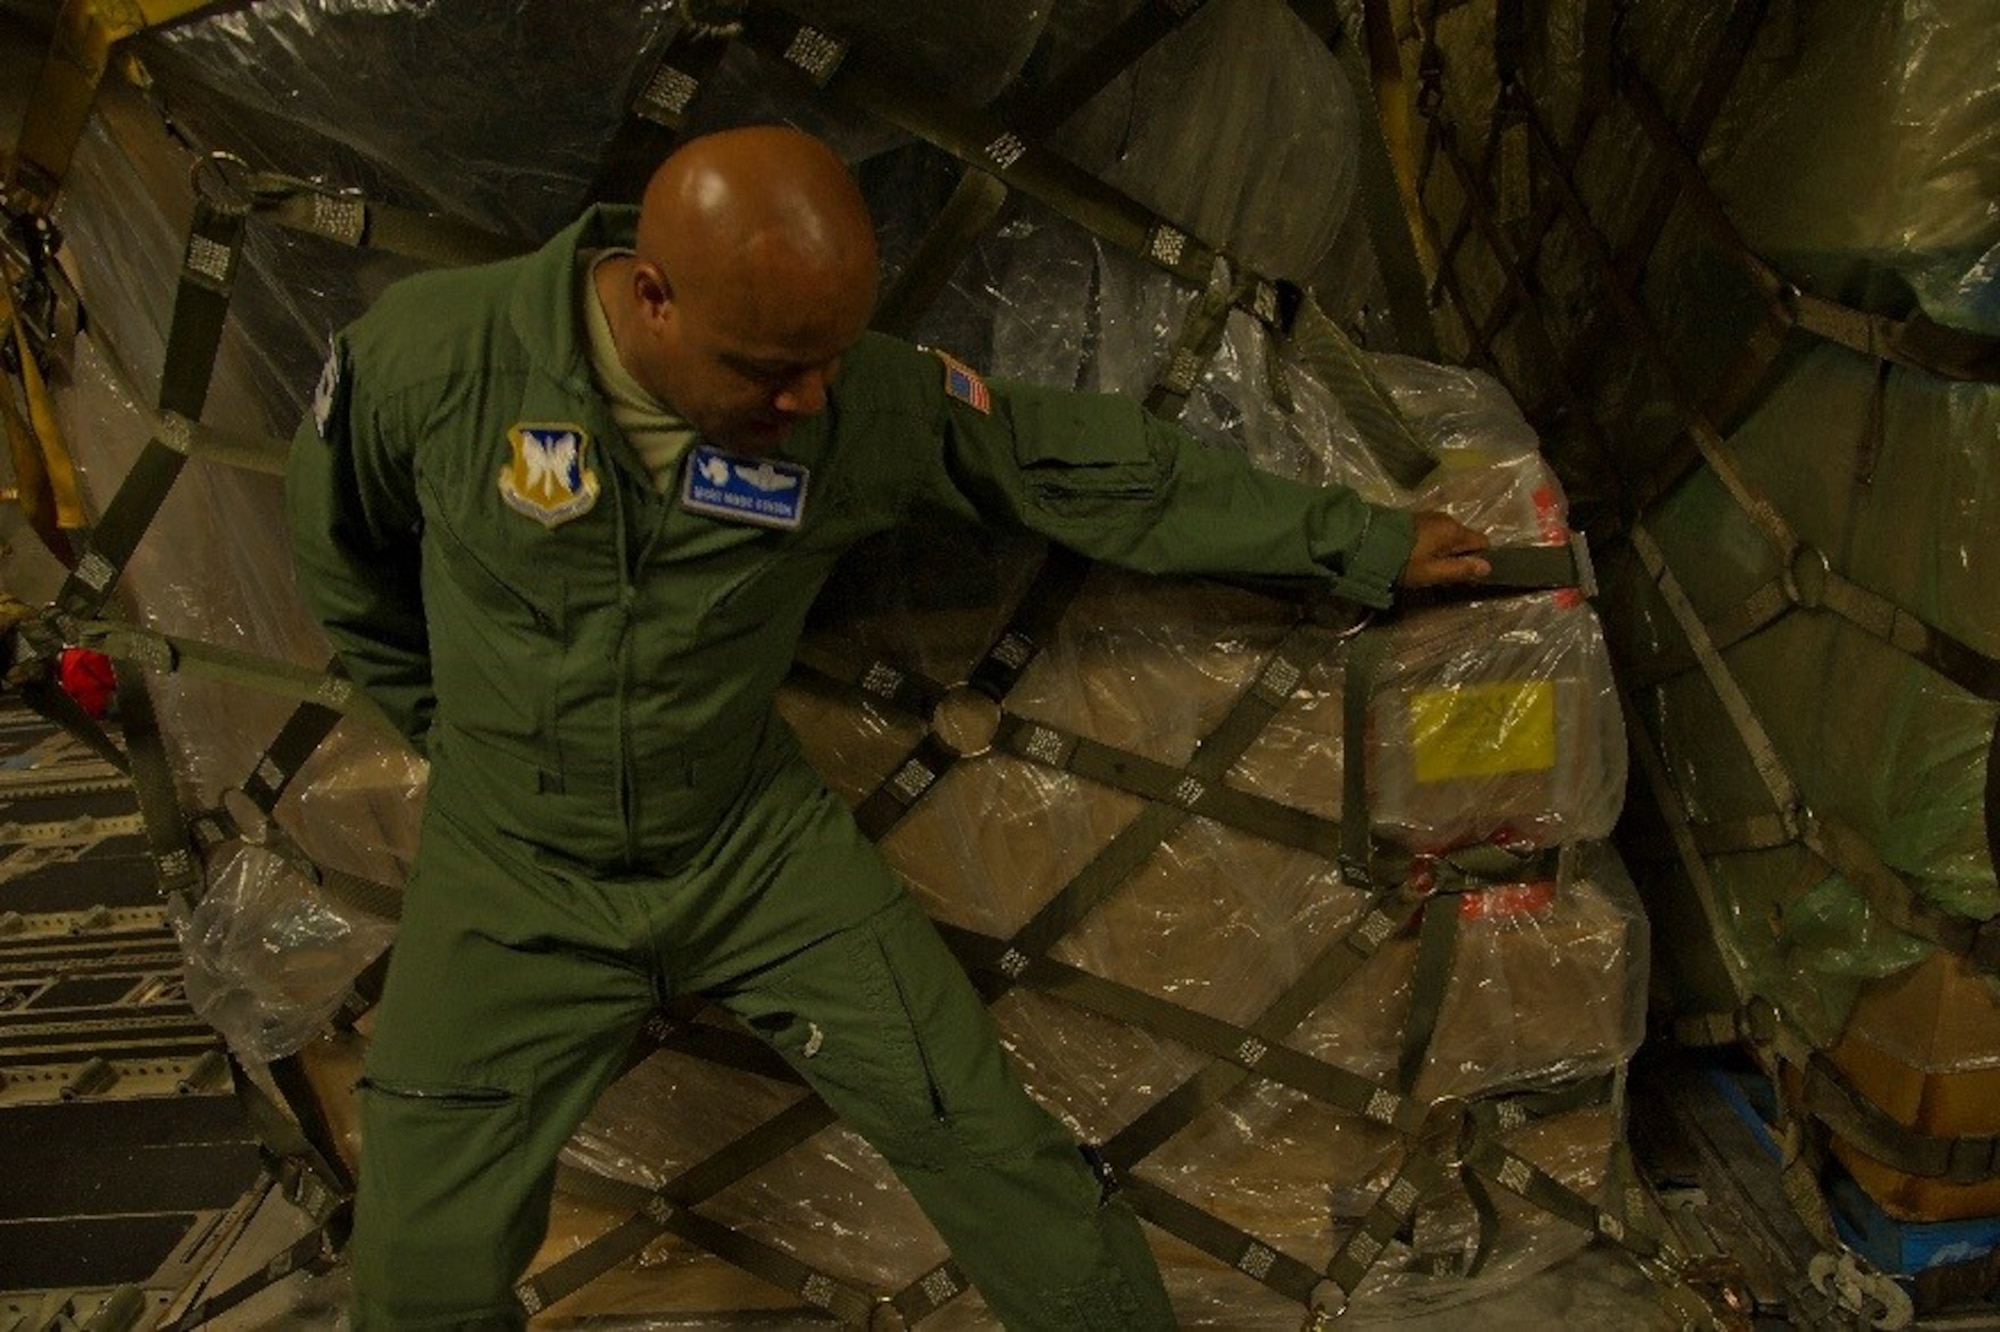 U.S. Air Force Master Sgt. Marc Staten, 304th Expeditionary Airlift Squadron loadmaster, moves a pallet onto a C-17 Globemaster III, during Operation Deep Freeze (ODF), July 15, 2016 at Christchurch International Airport, New Zealand. ODF is a joint operation between the U.S. Air Force, the National Science Foundation, and the Royal New Zealand Air Force.   (U.S. Air Force Reserve photo by Staff Sgt. Madelyn McCullough)